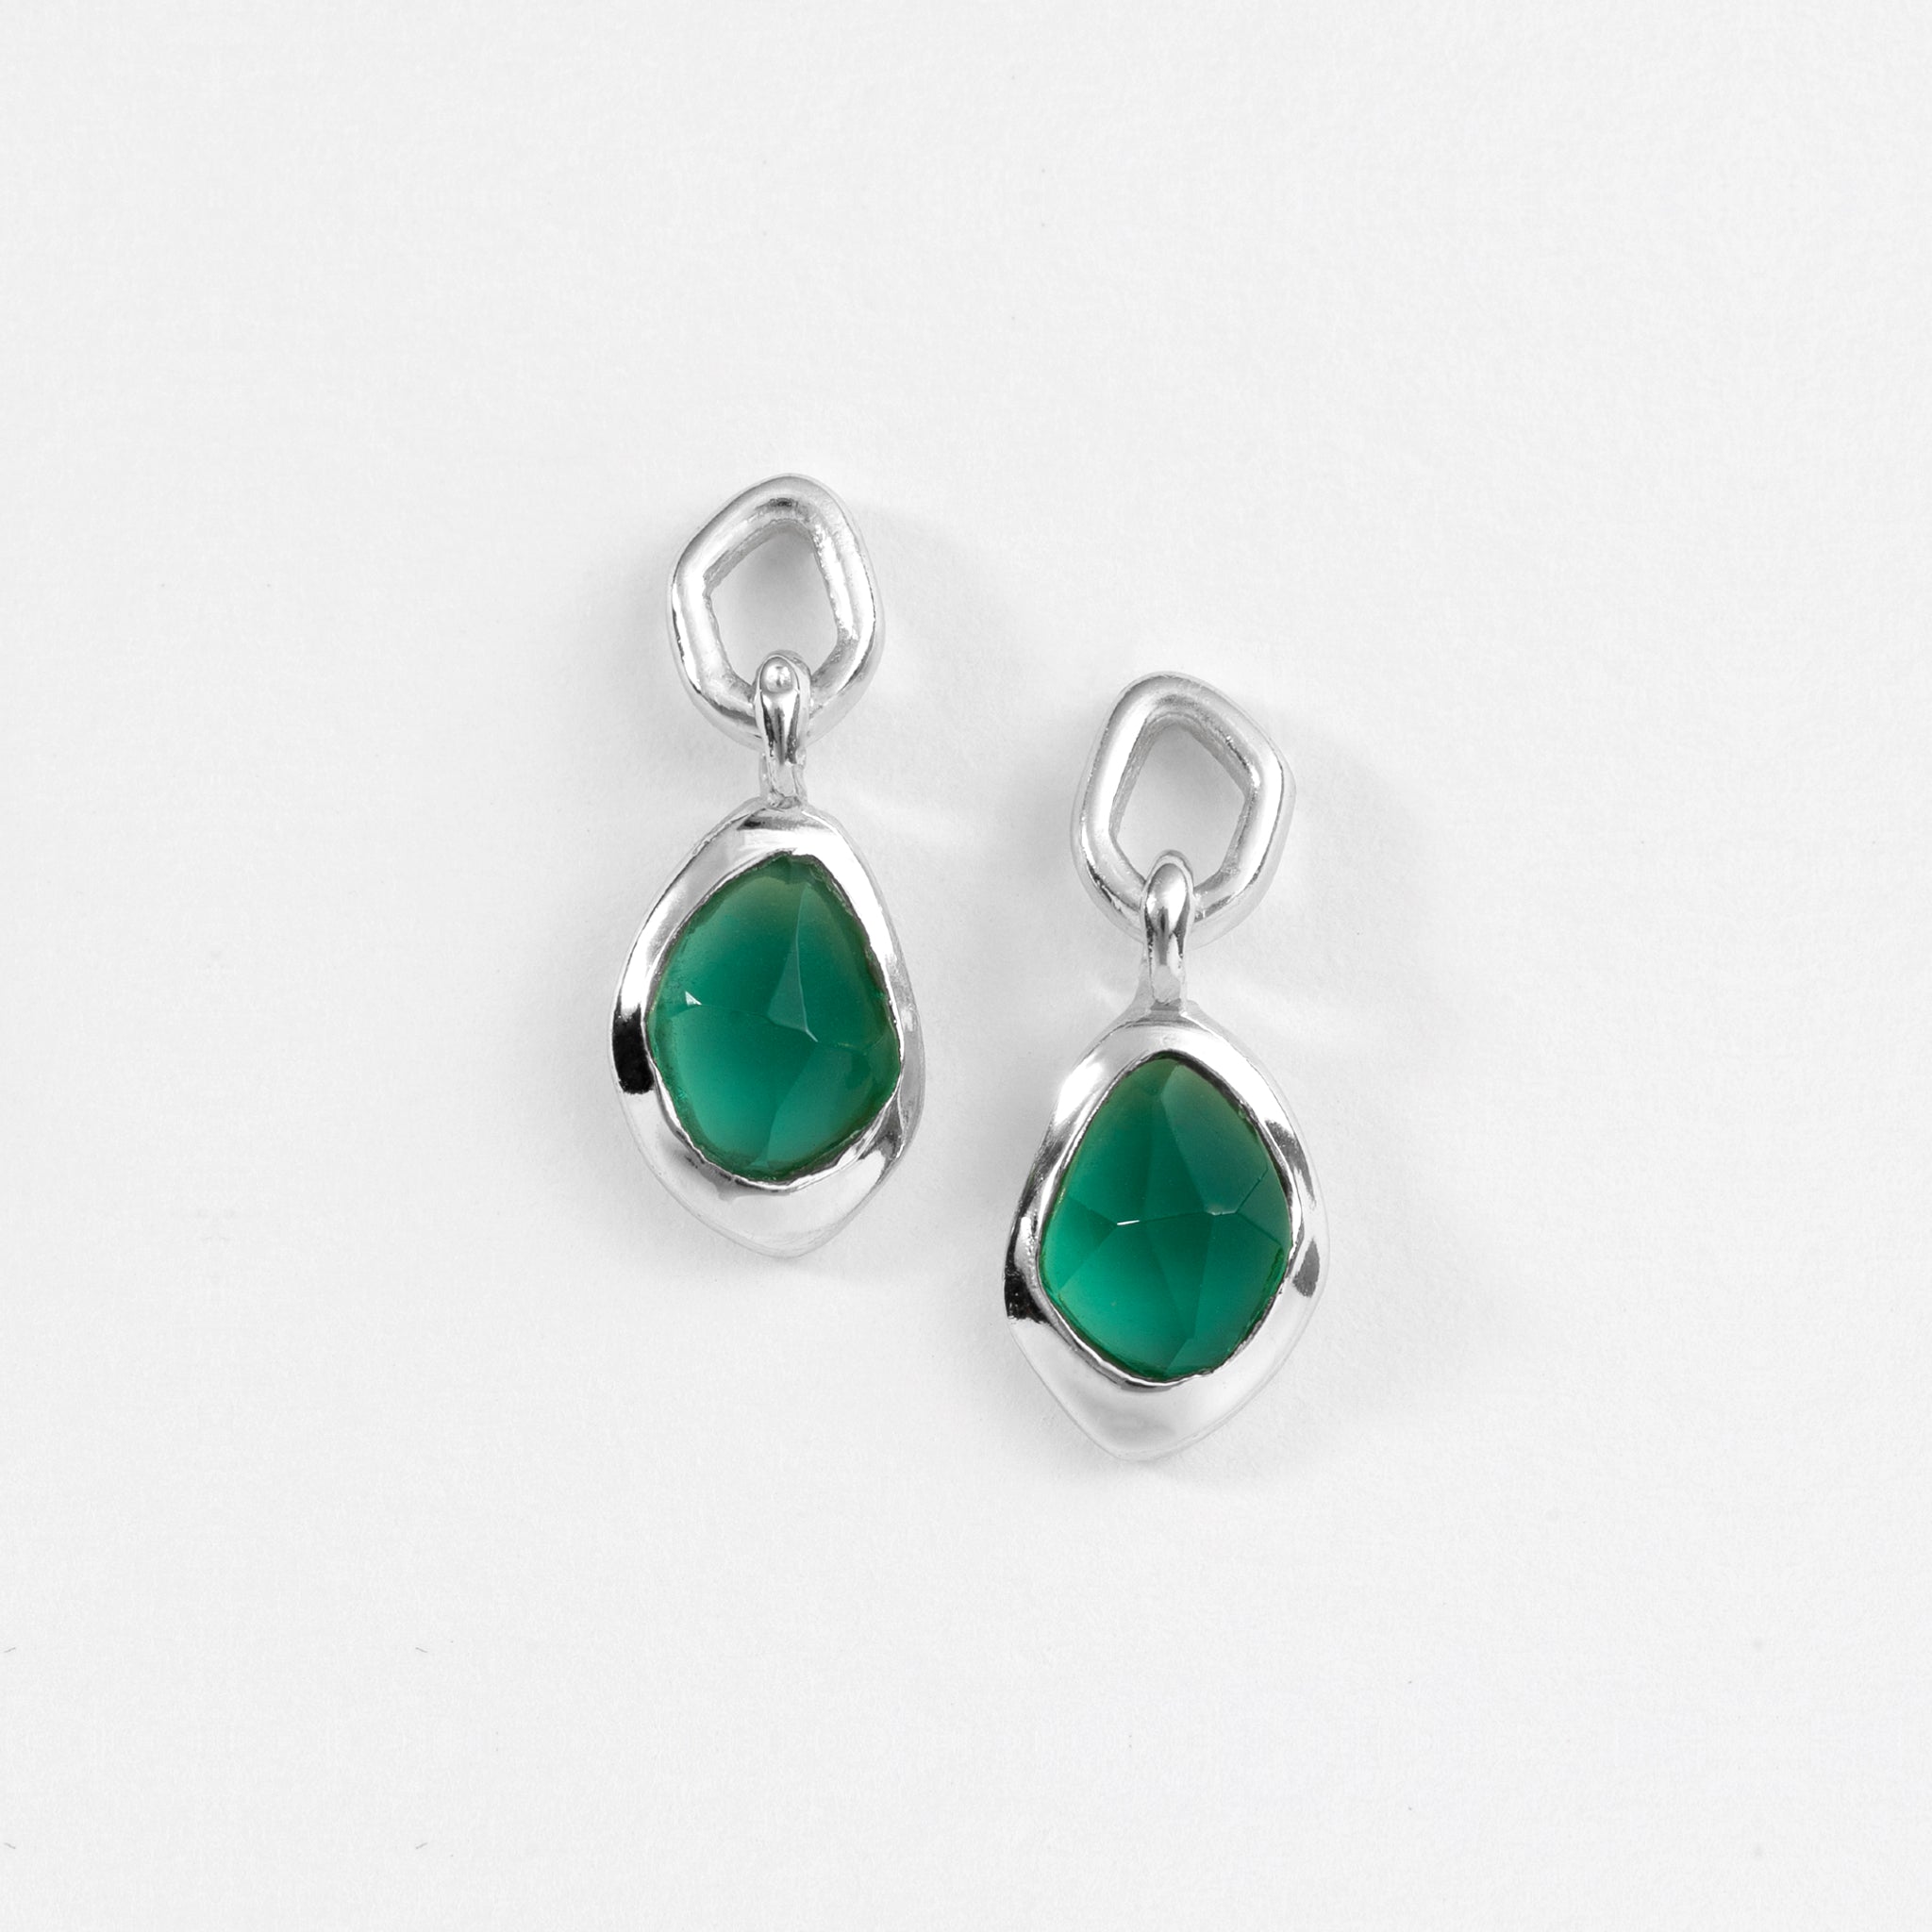 Earring features a sparkling, handcut natural gemstone and is crafted from sterling silver or 18ct gold vermeil.